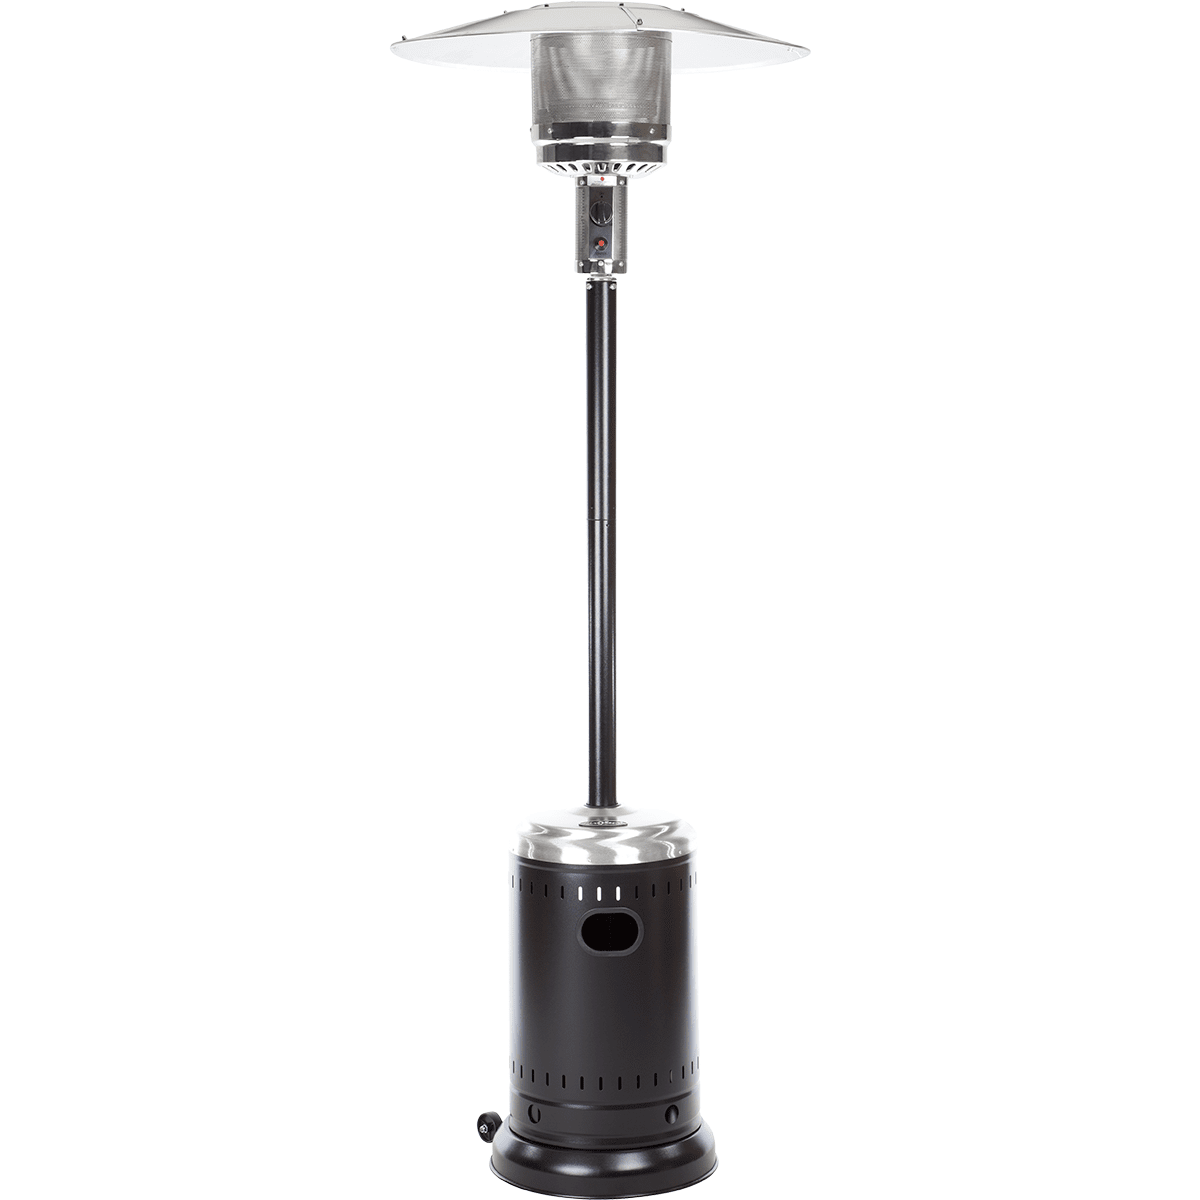 Fire Sense Commercial Patio Heater Hammer Tone Black And Stainless Steel Finish (61444)